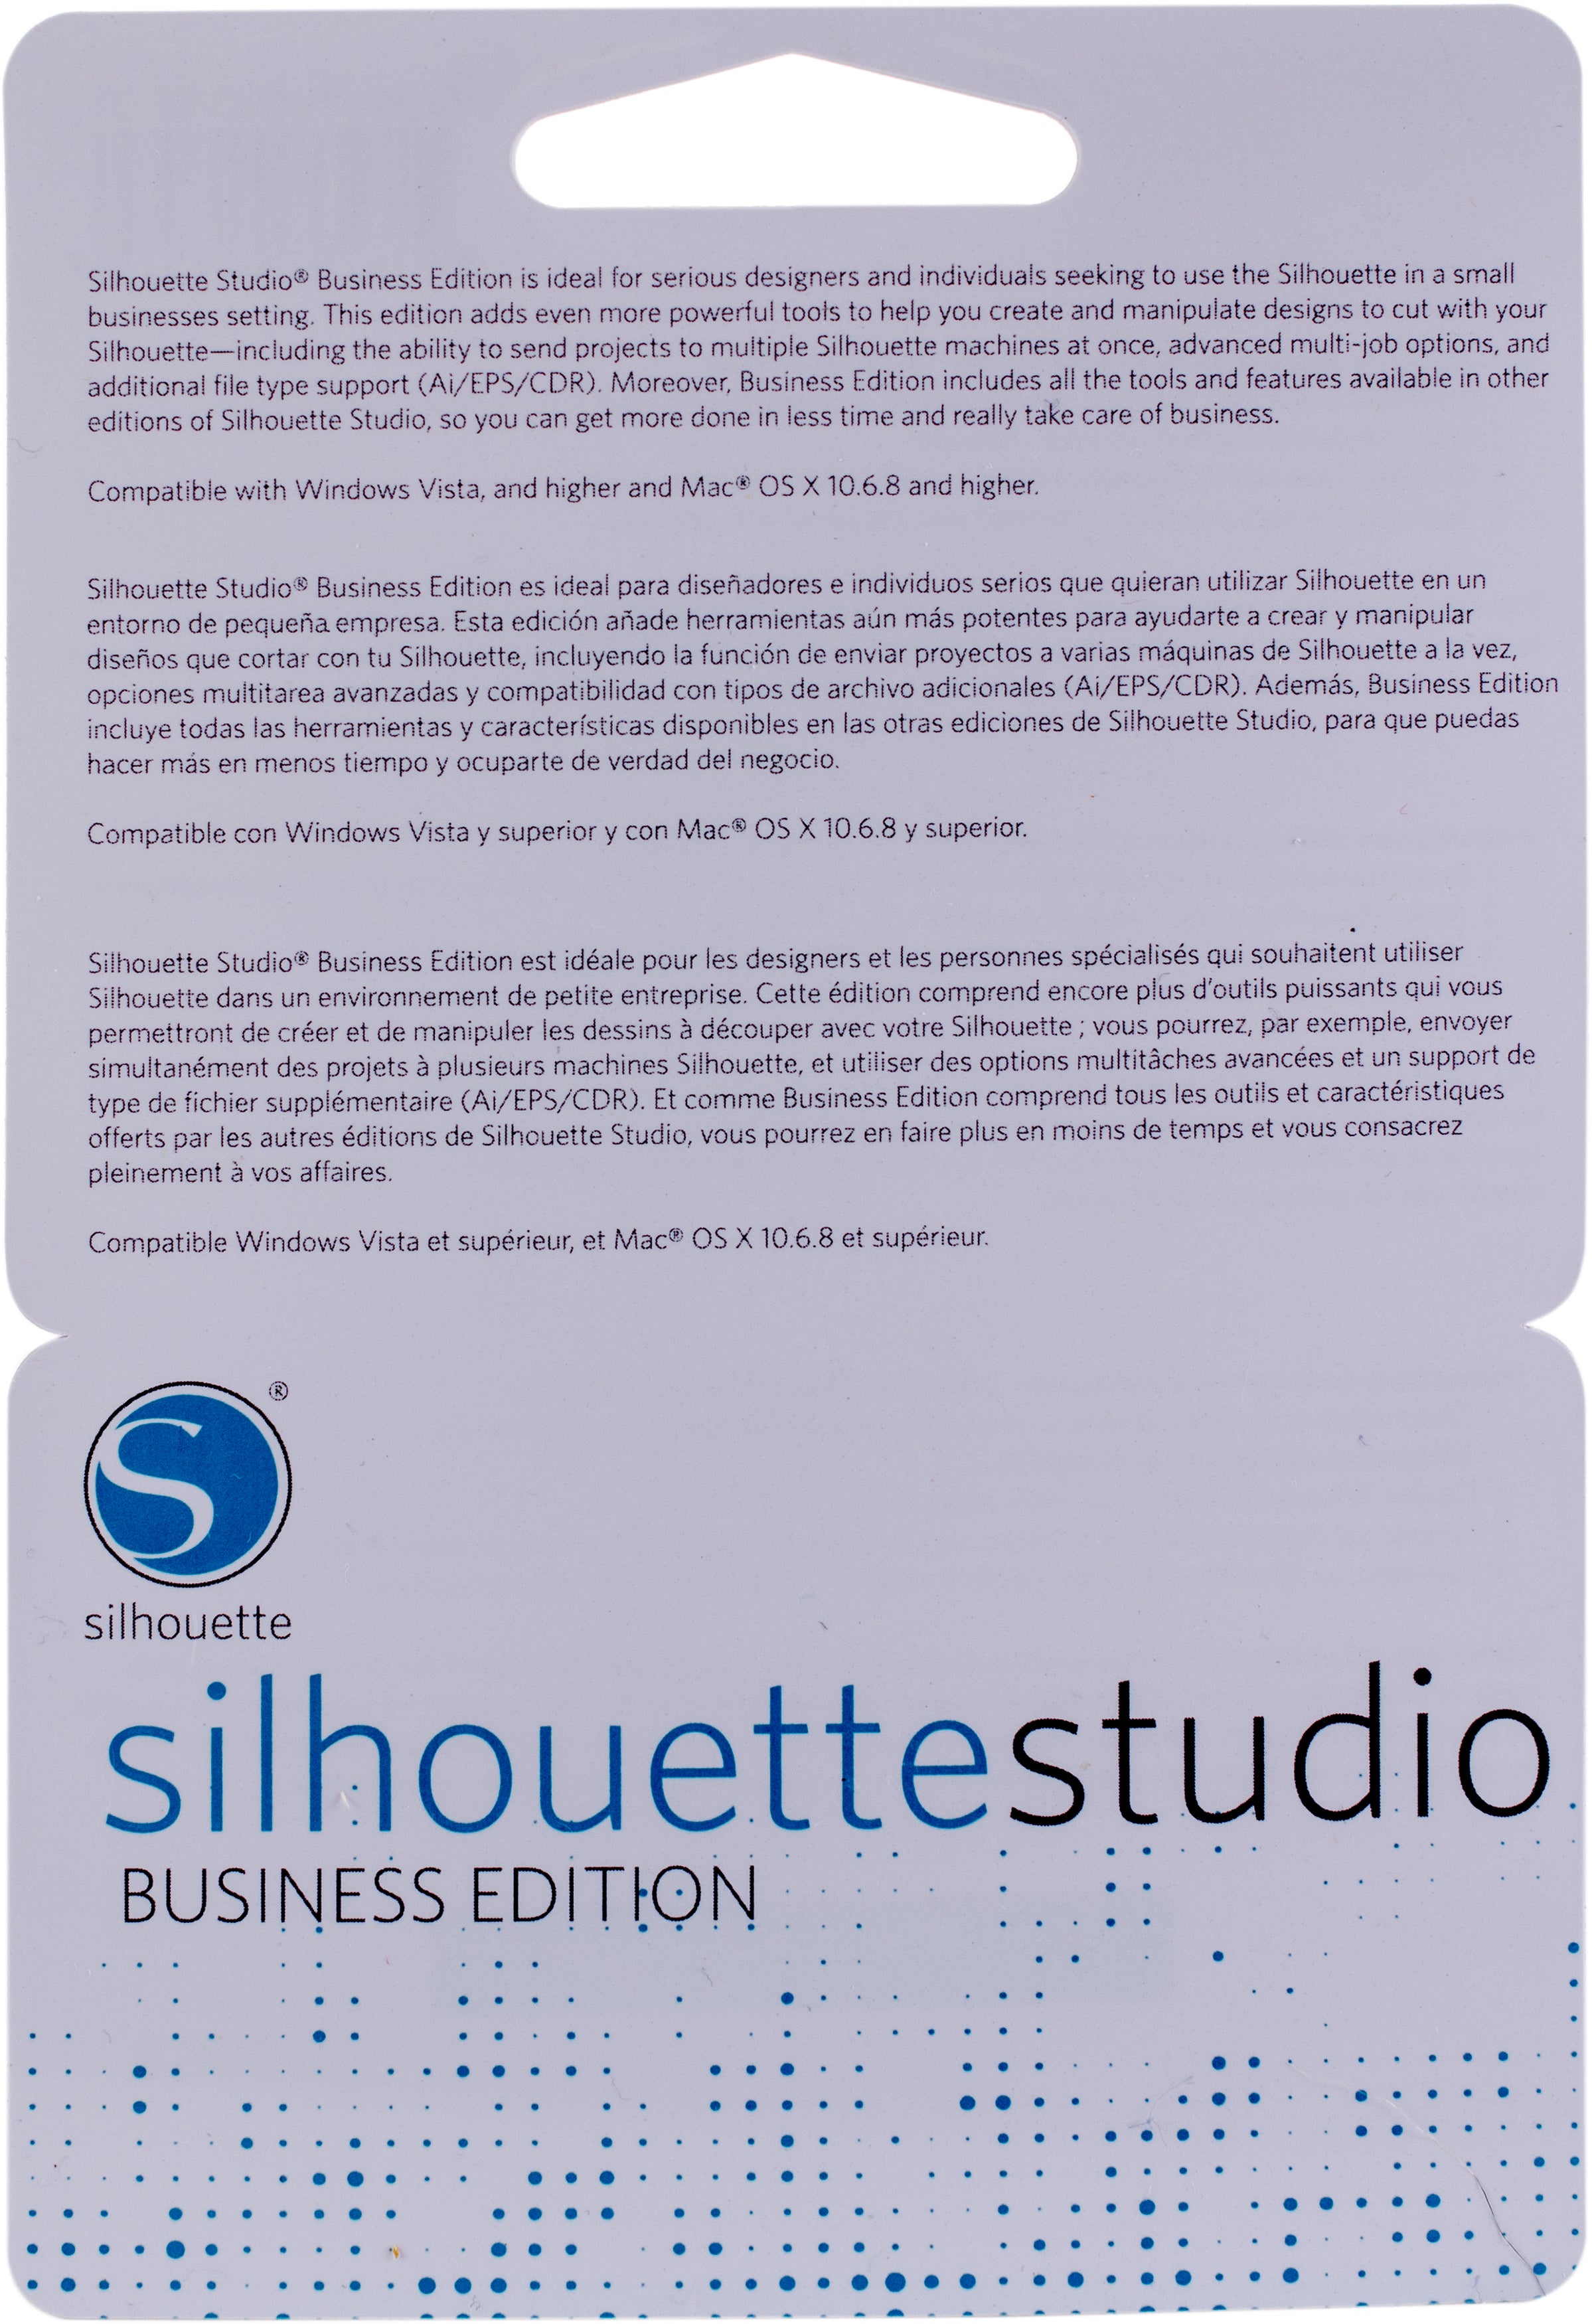 export files from silhouette studio business edition